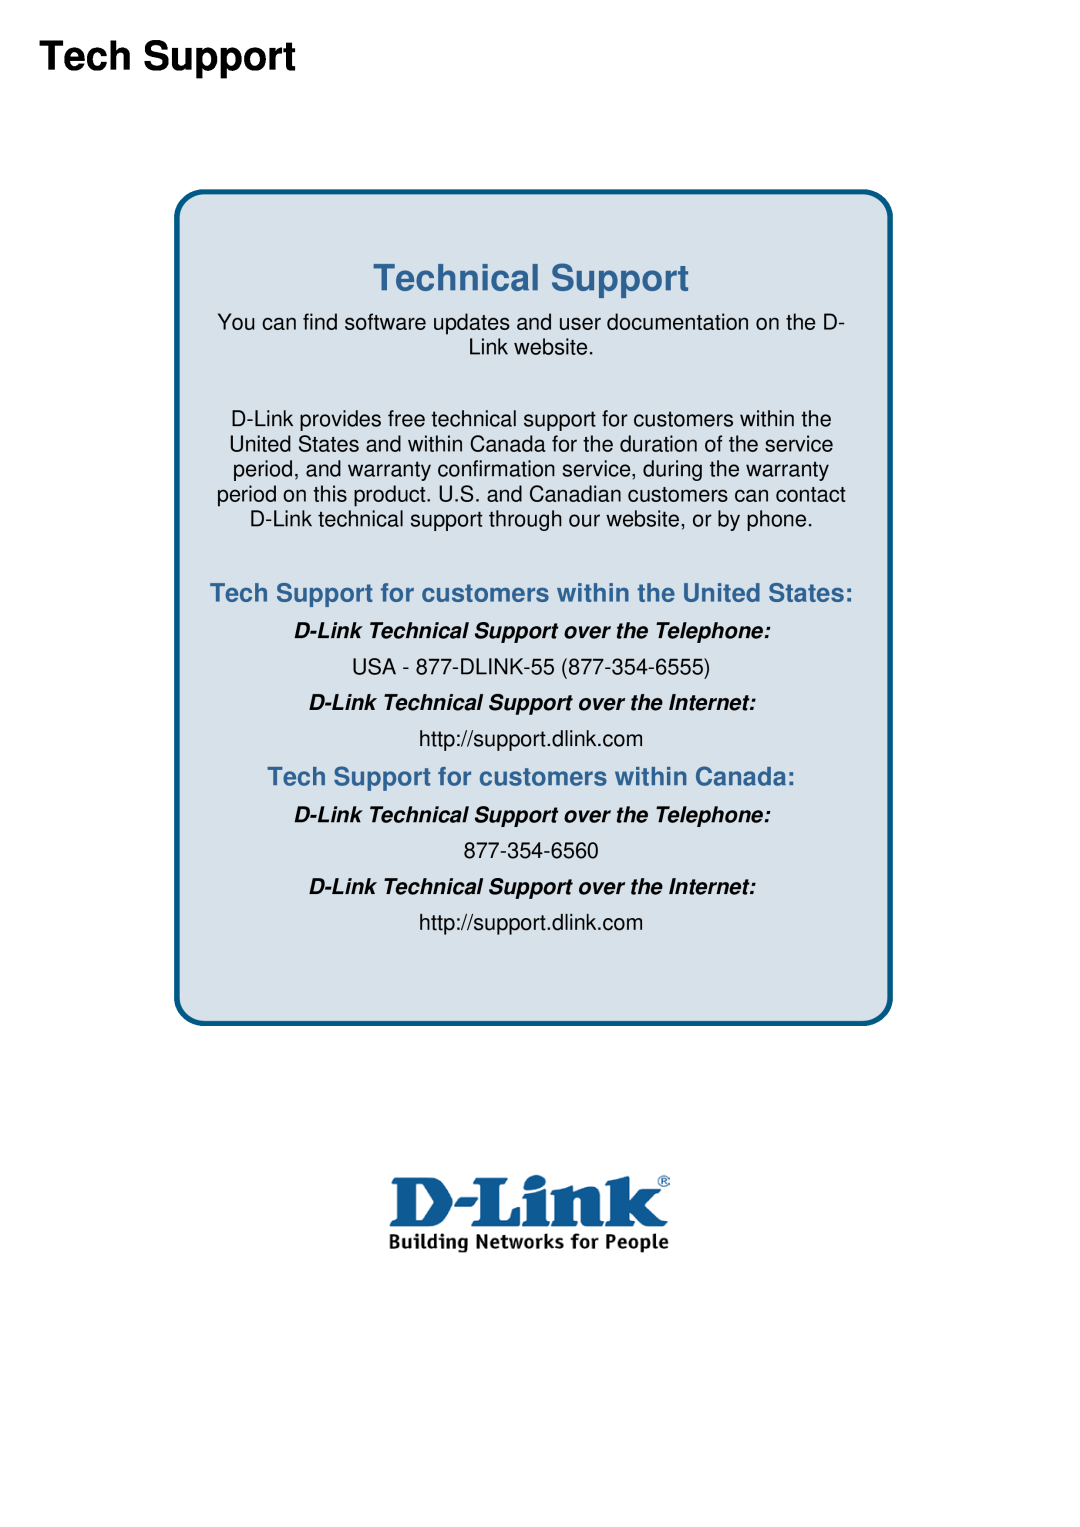 D-Link ethernet managed switch manual Technical Support, Tech Support for customers within the United States 